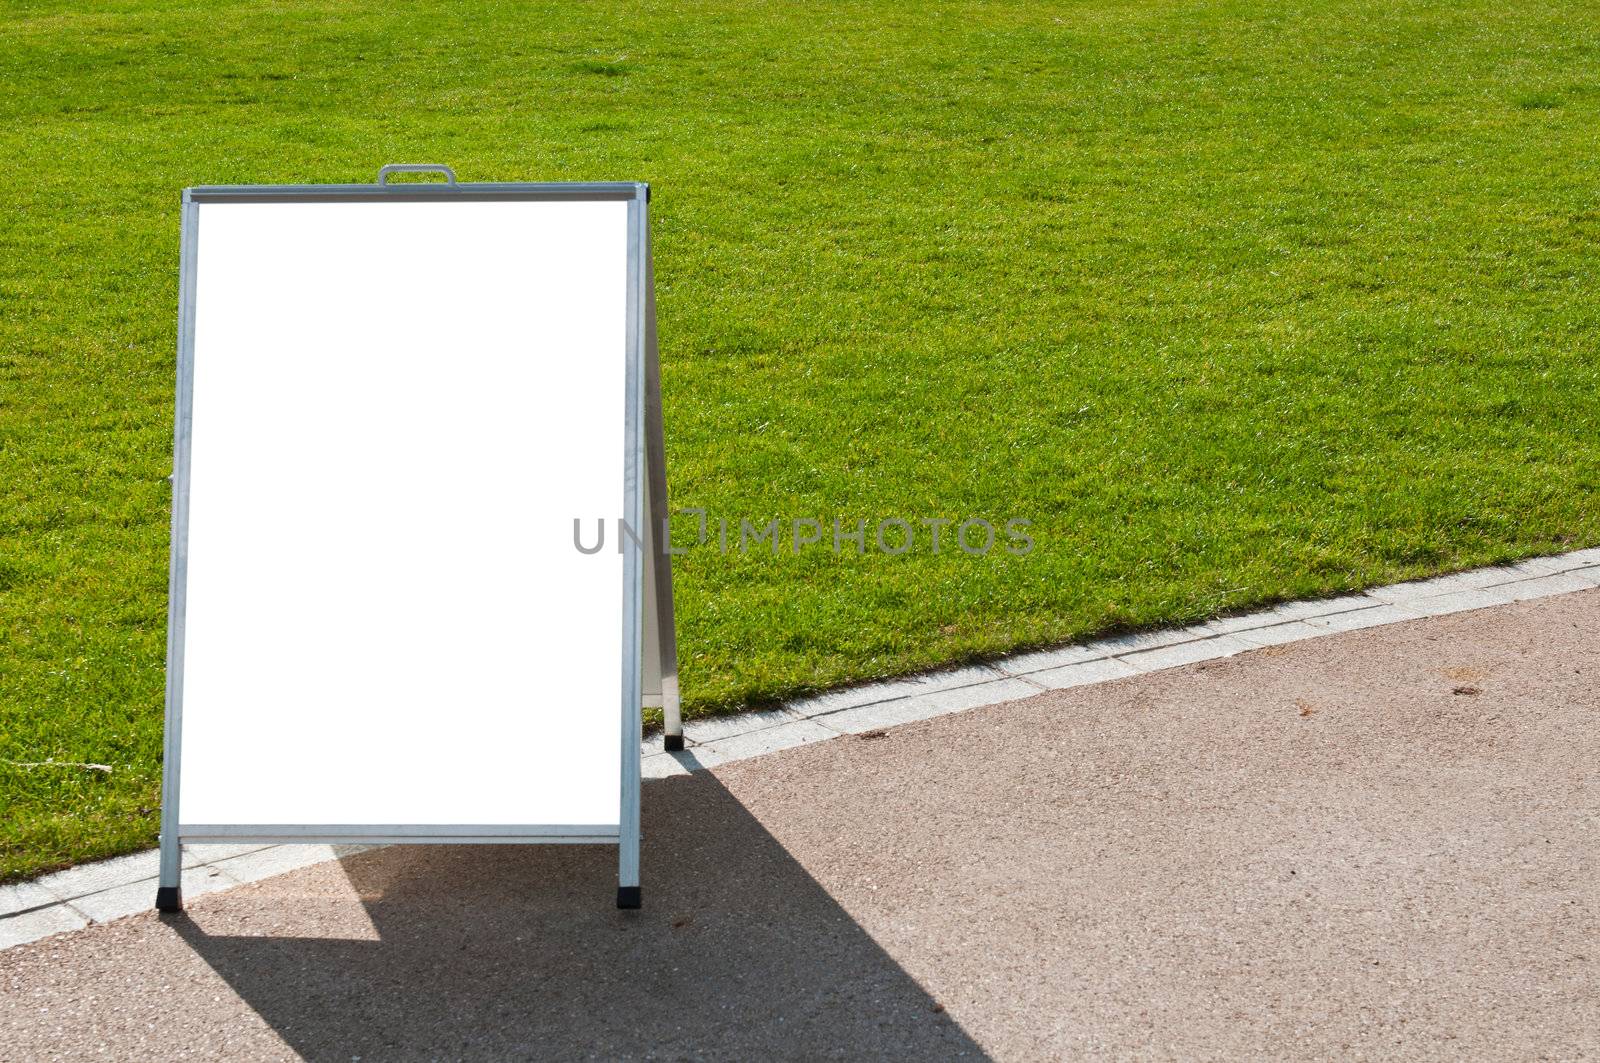 empty metallic board next to a grass field (isolated on white, focus on the grass)